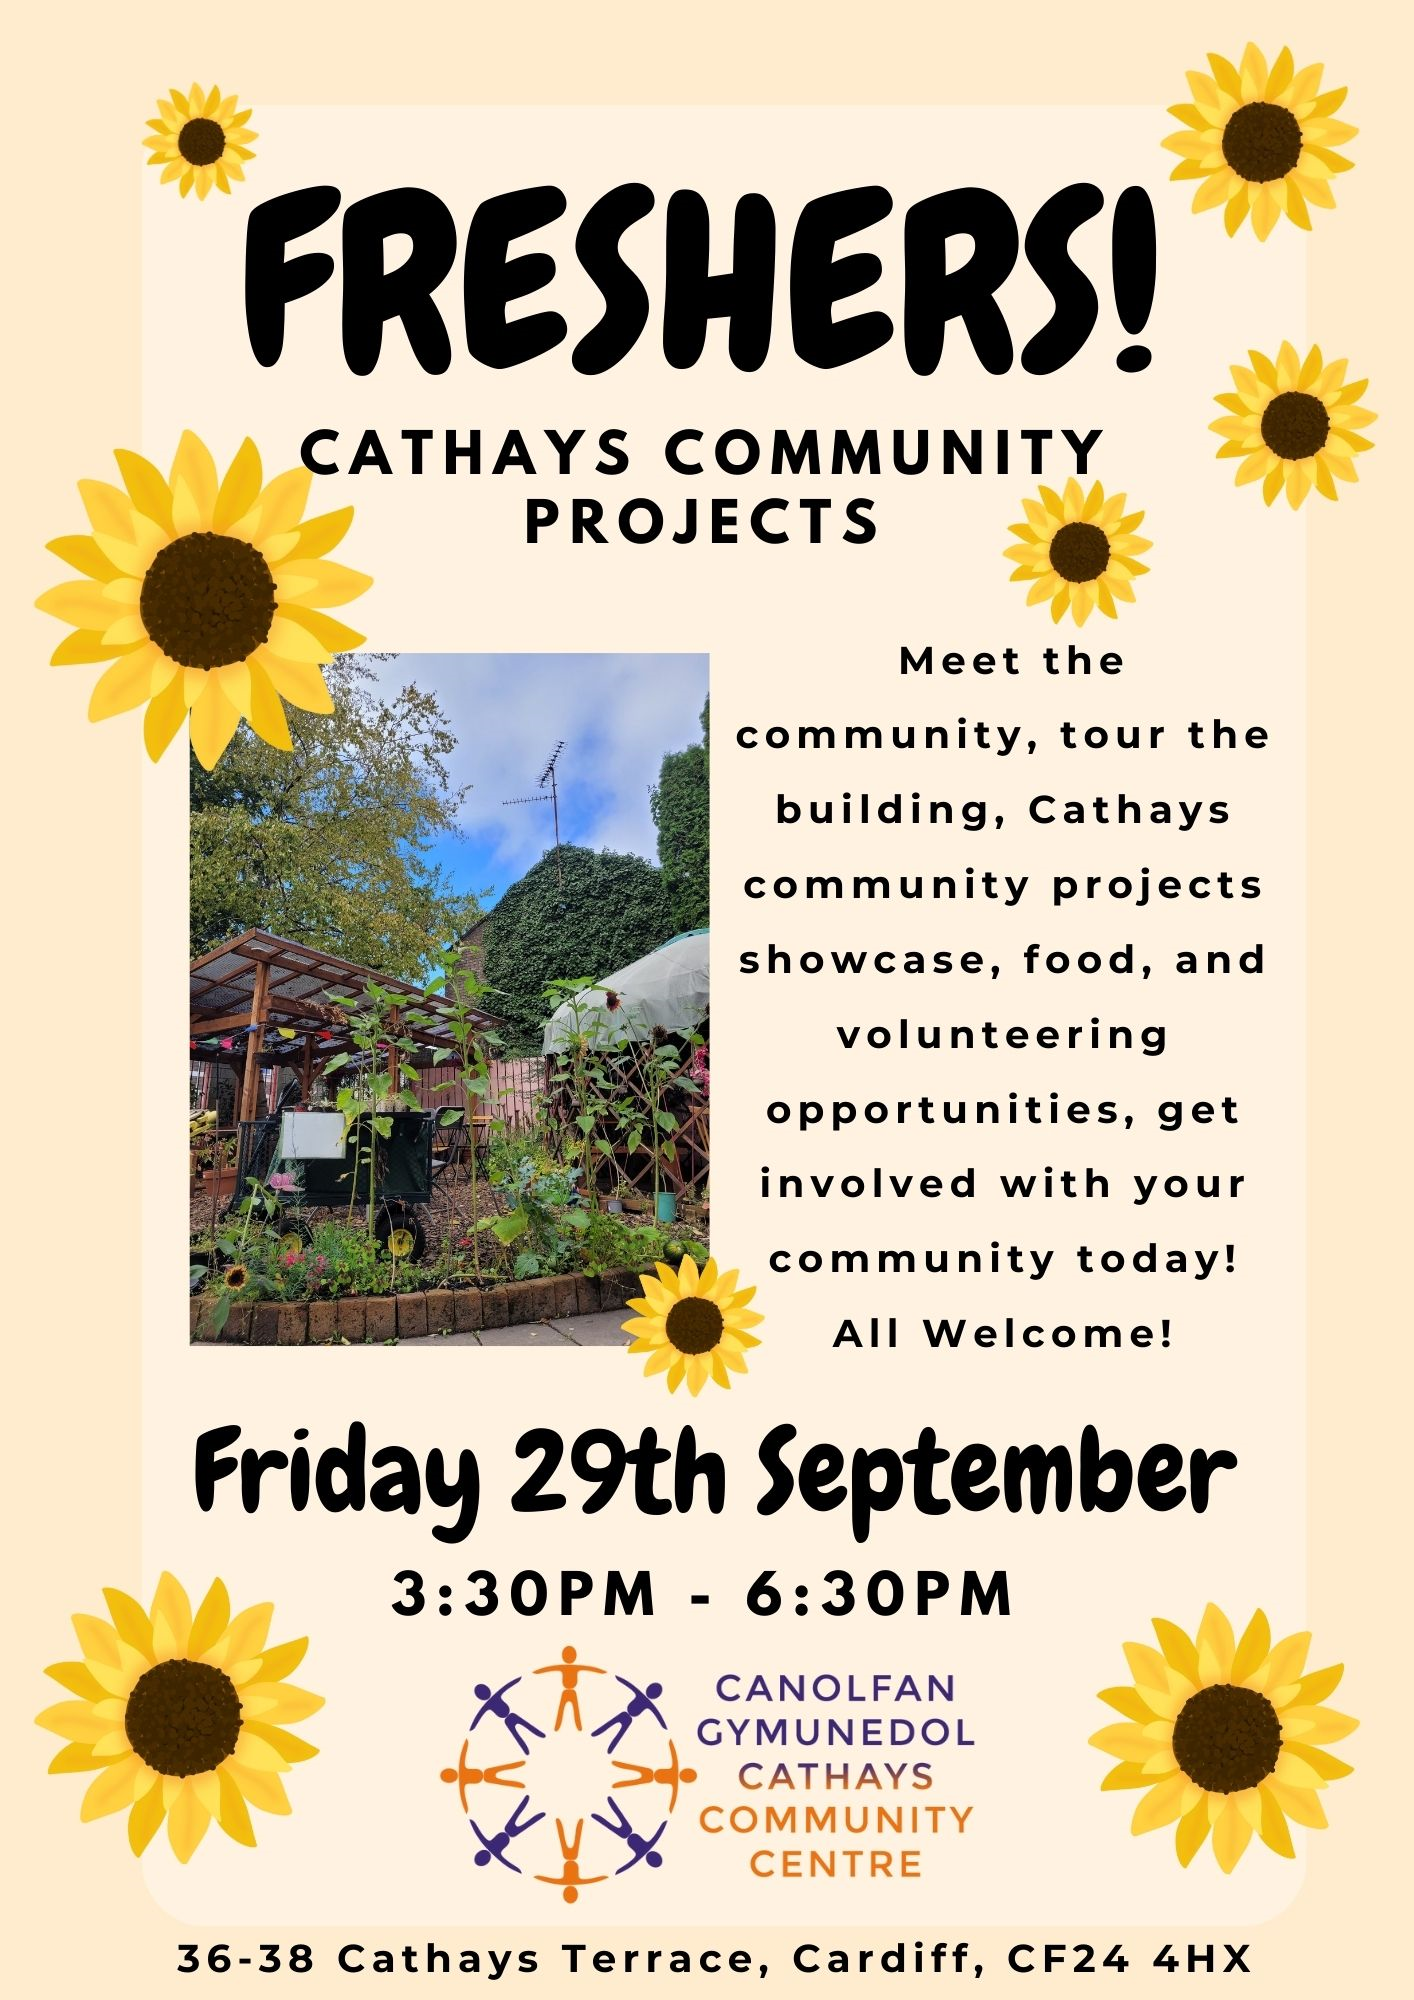 Meet the community. Join us on the 29th of September – Cathays Community Project